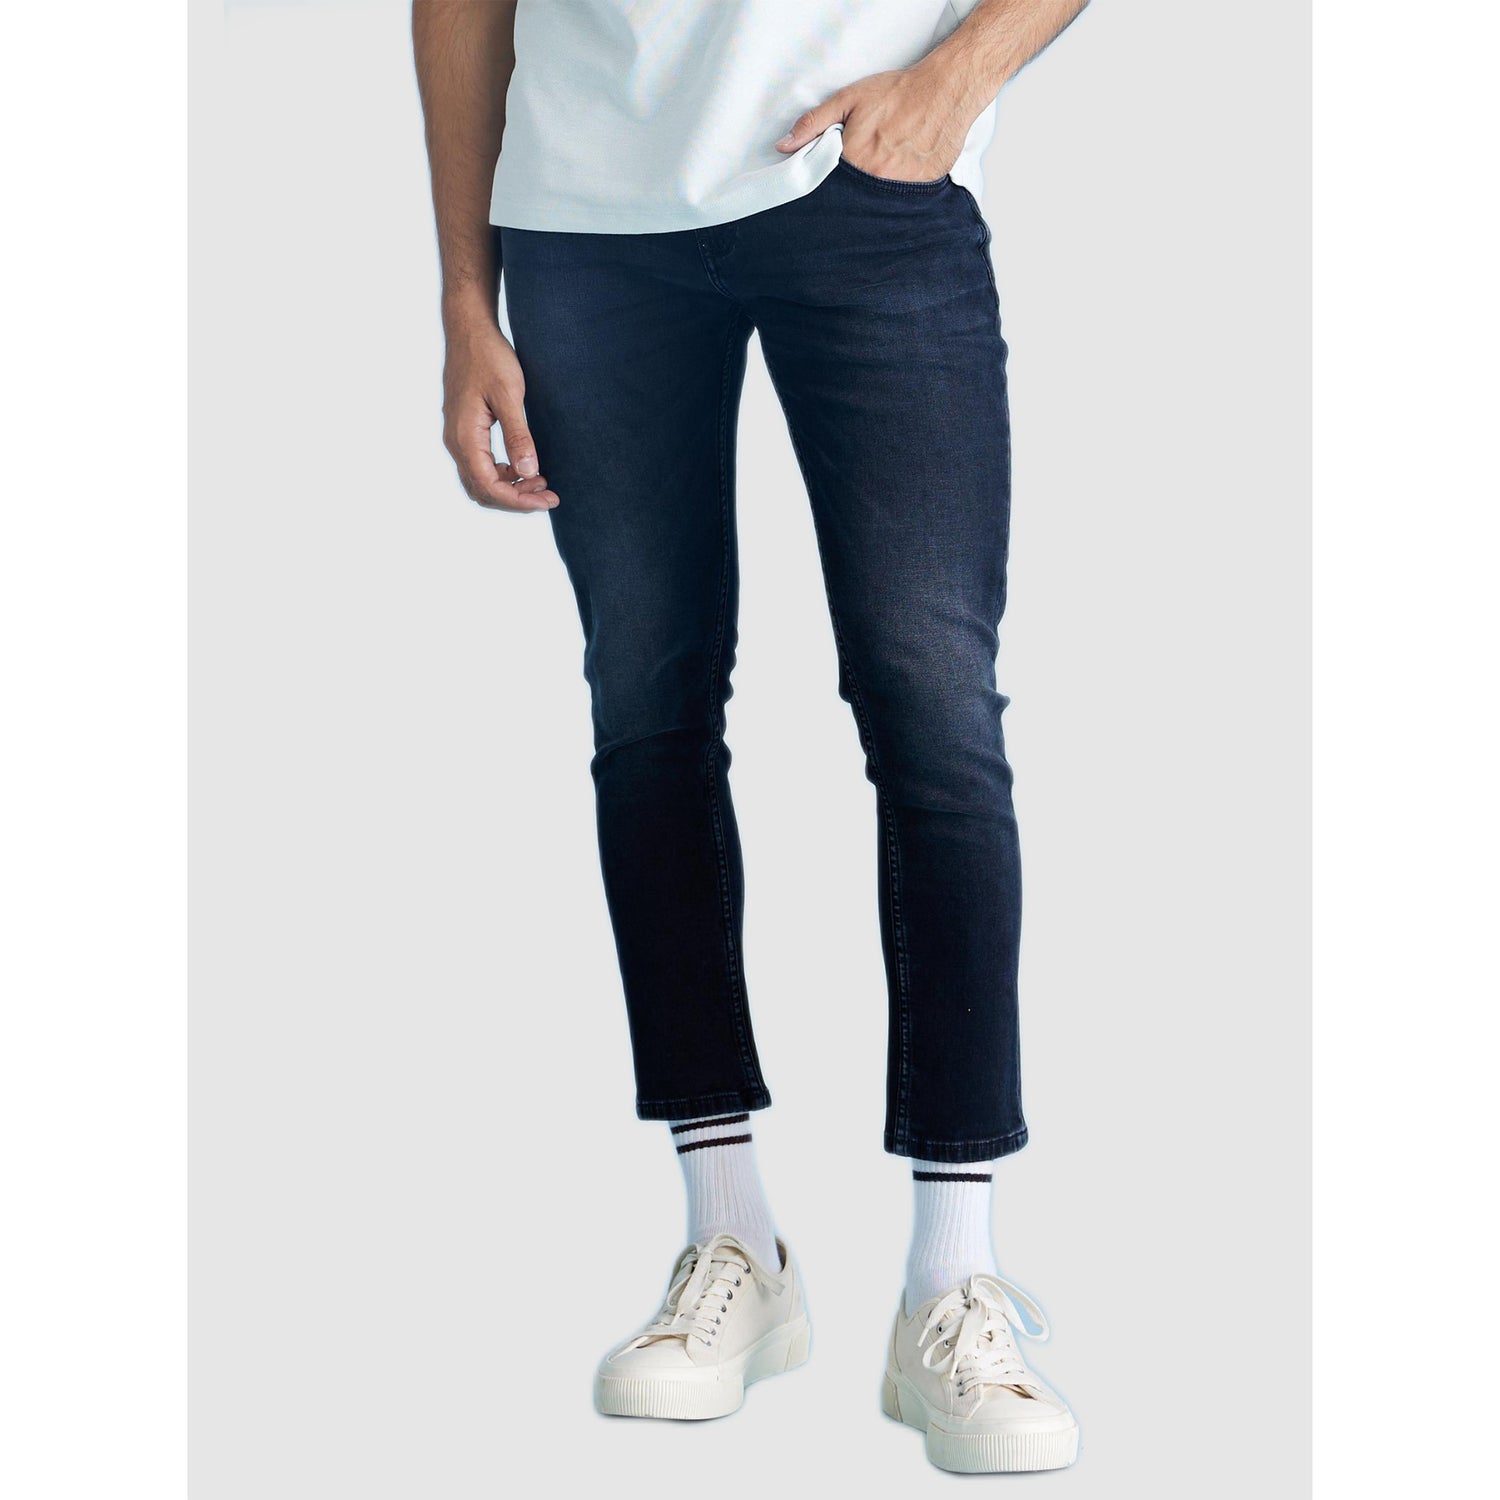 Navy Blue Regular Fit Light Fade Stretchable Cotton Jeans (DOANKLE4)